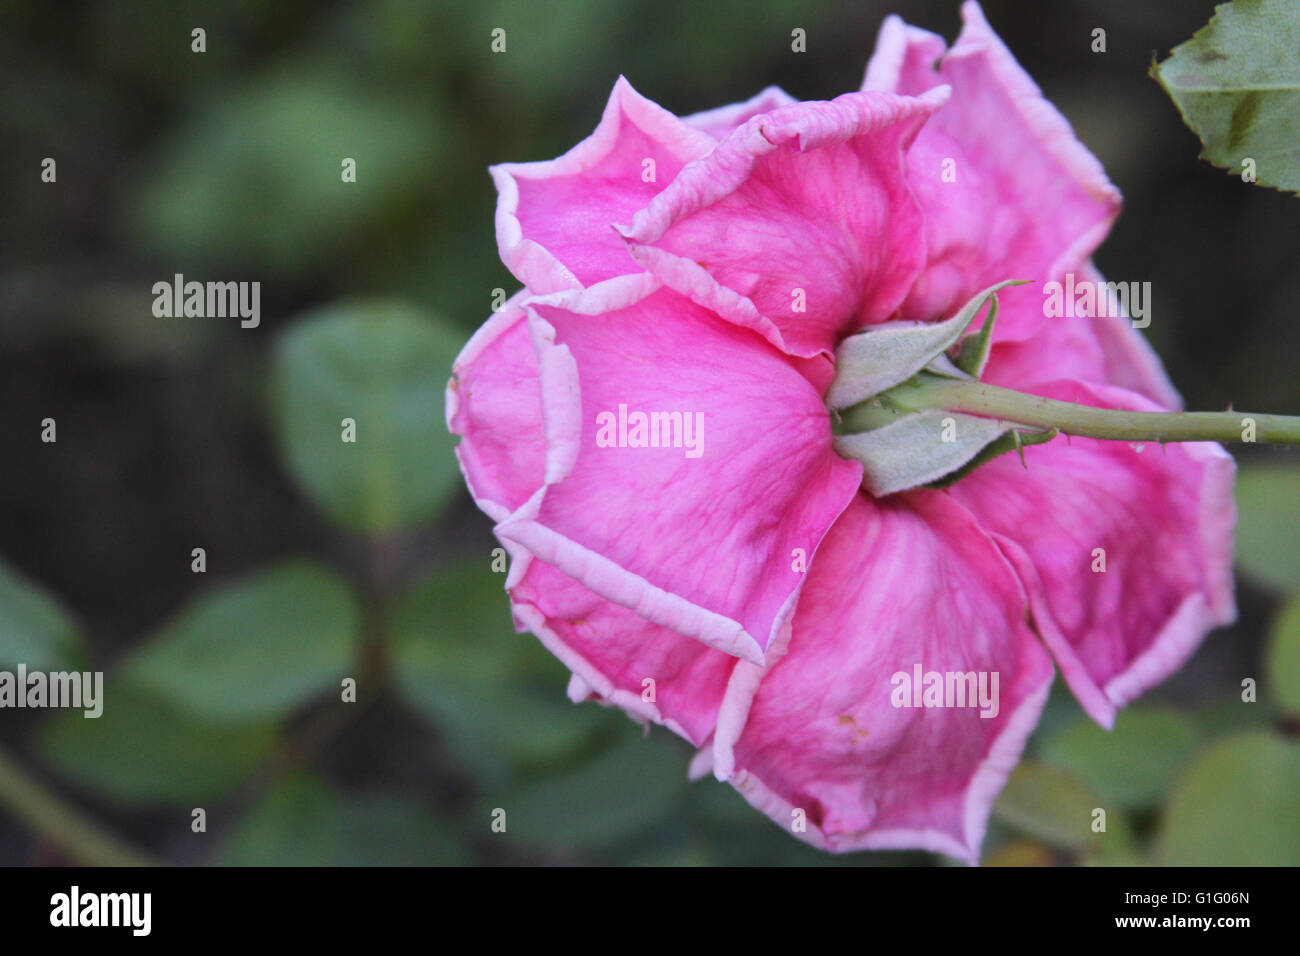 Closeup of a vibrant pink rose viewed from the back Stock Photo